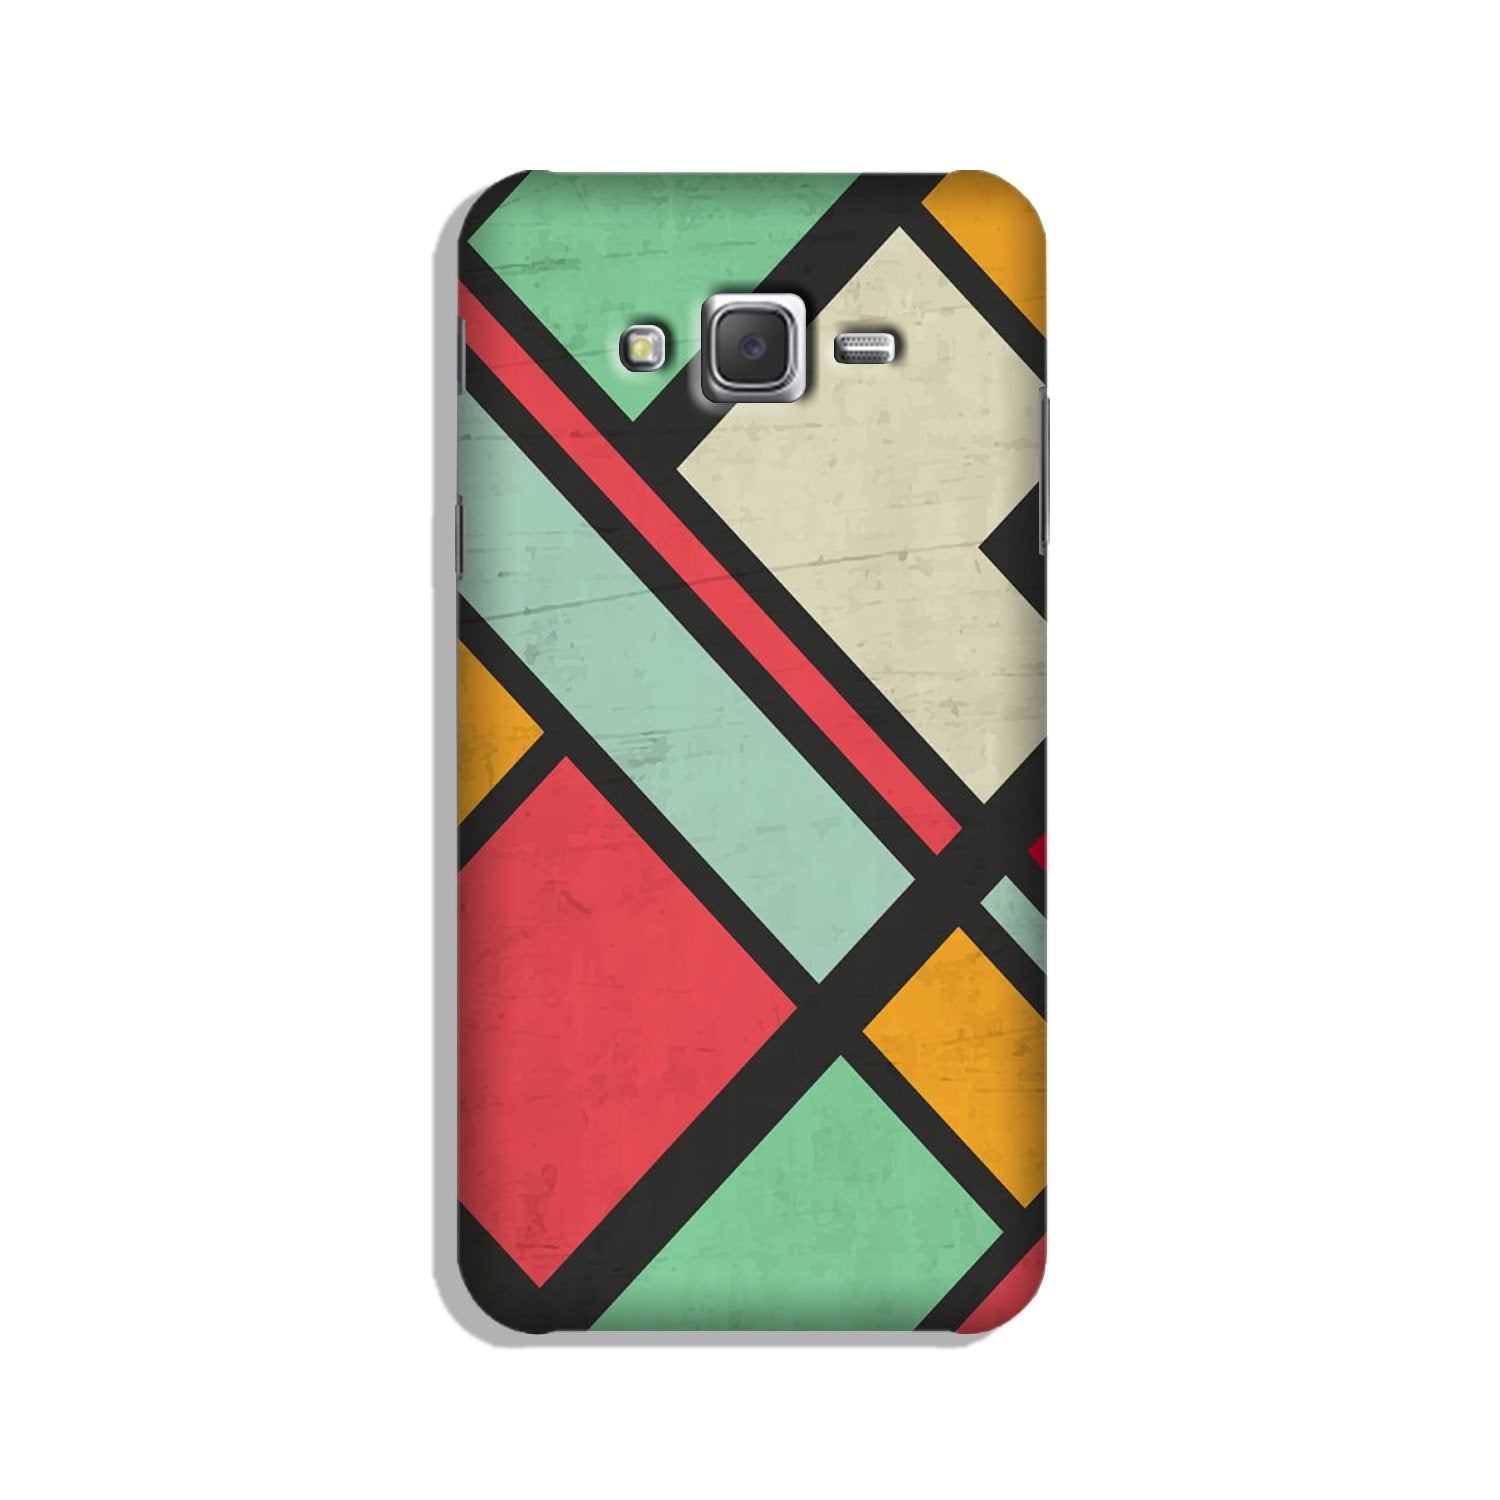 Boxes Case for Galaxy J7 Nxt (Design - 187)